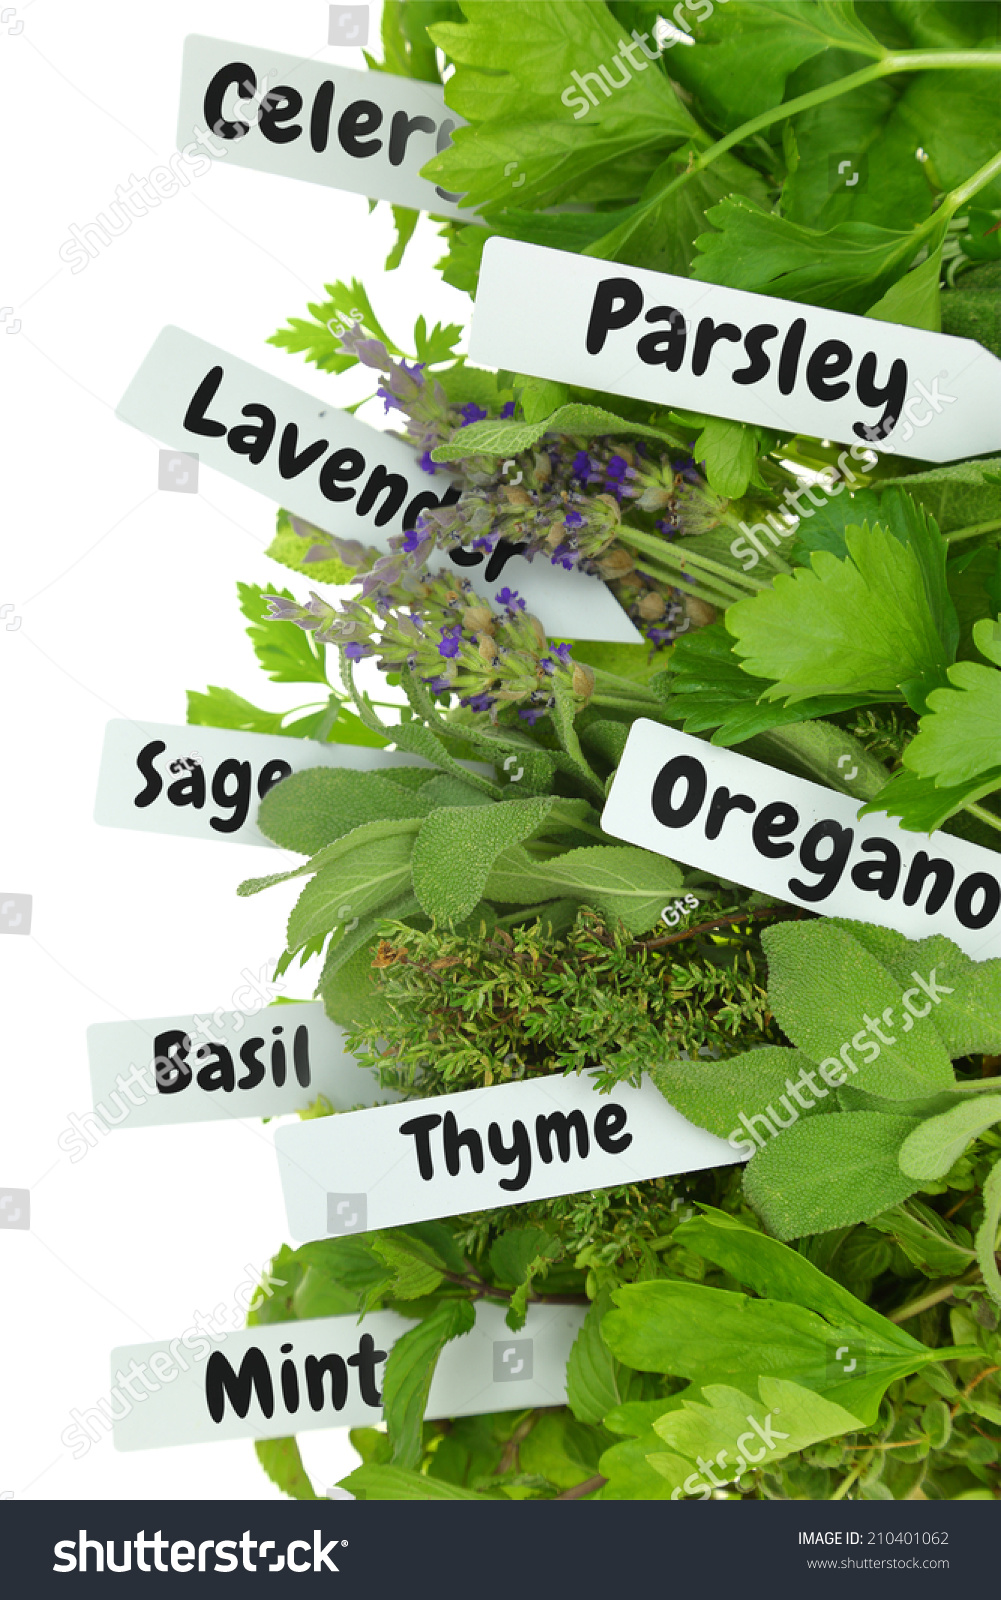 Close Fresh Herbs Name Tags Stock Photo 210401062 - Shutterstock